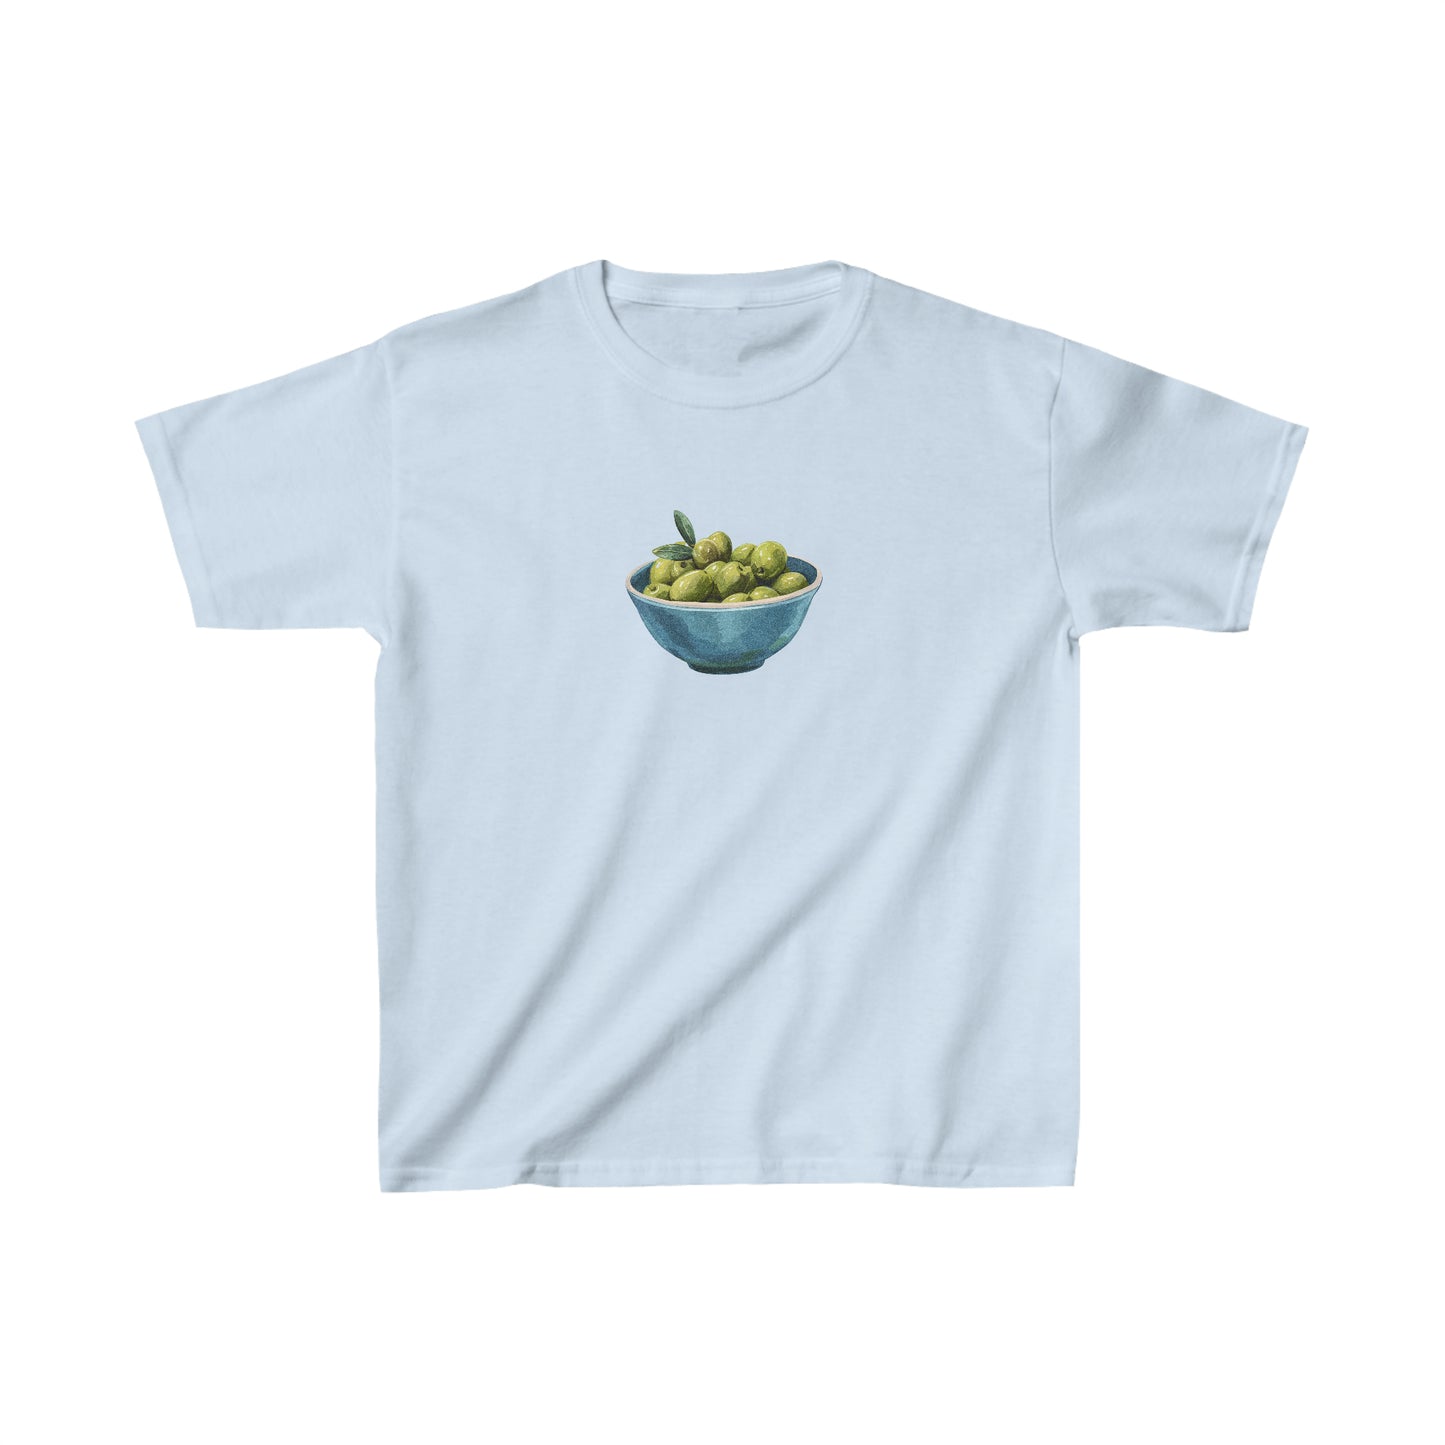 Olive Bowl Baby Tee